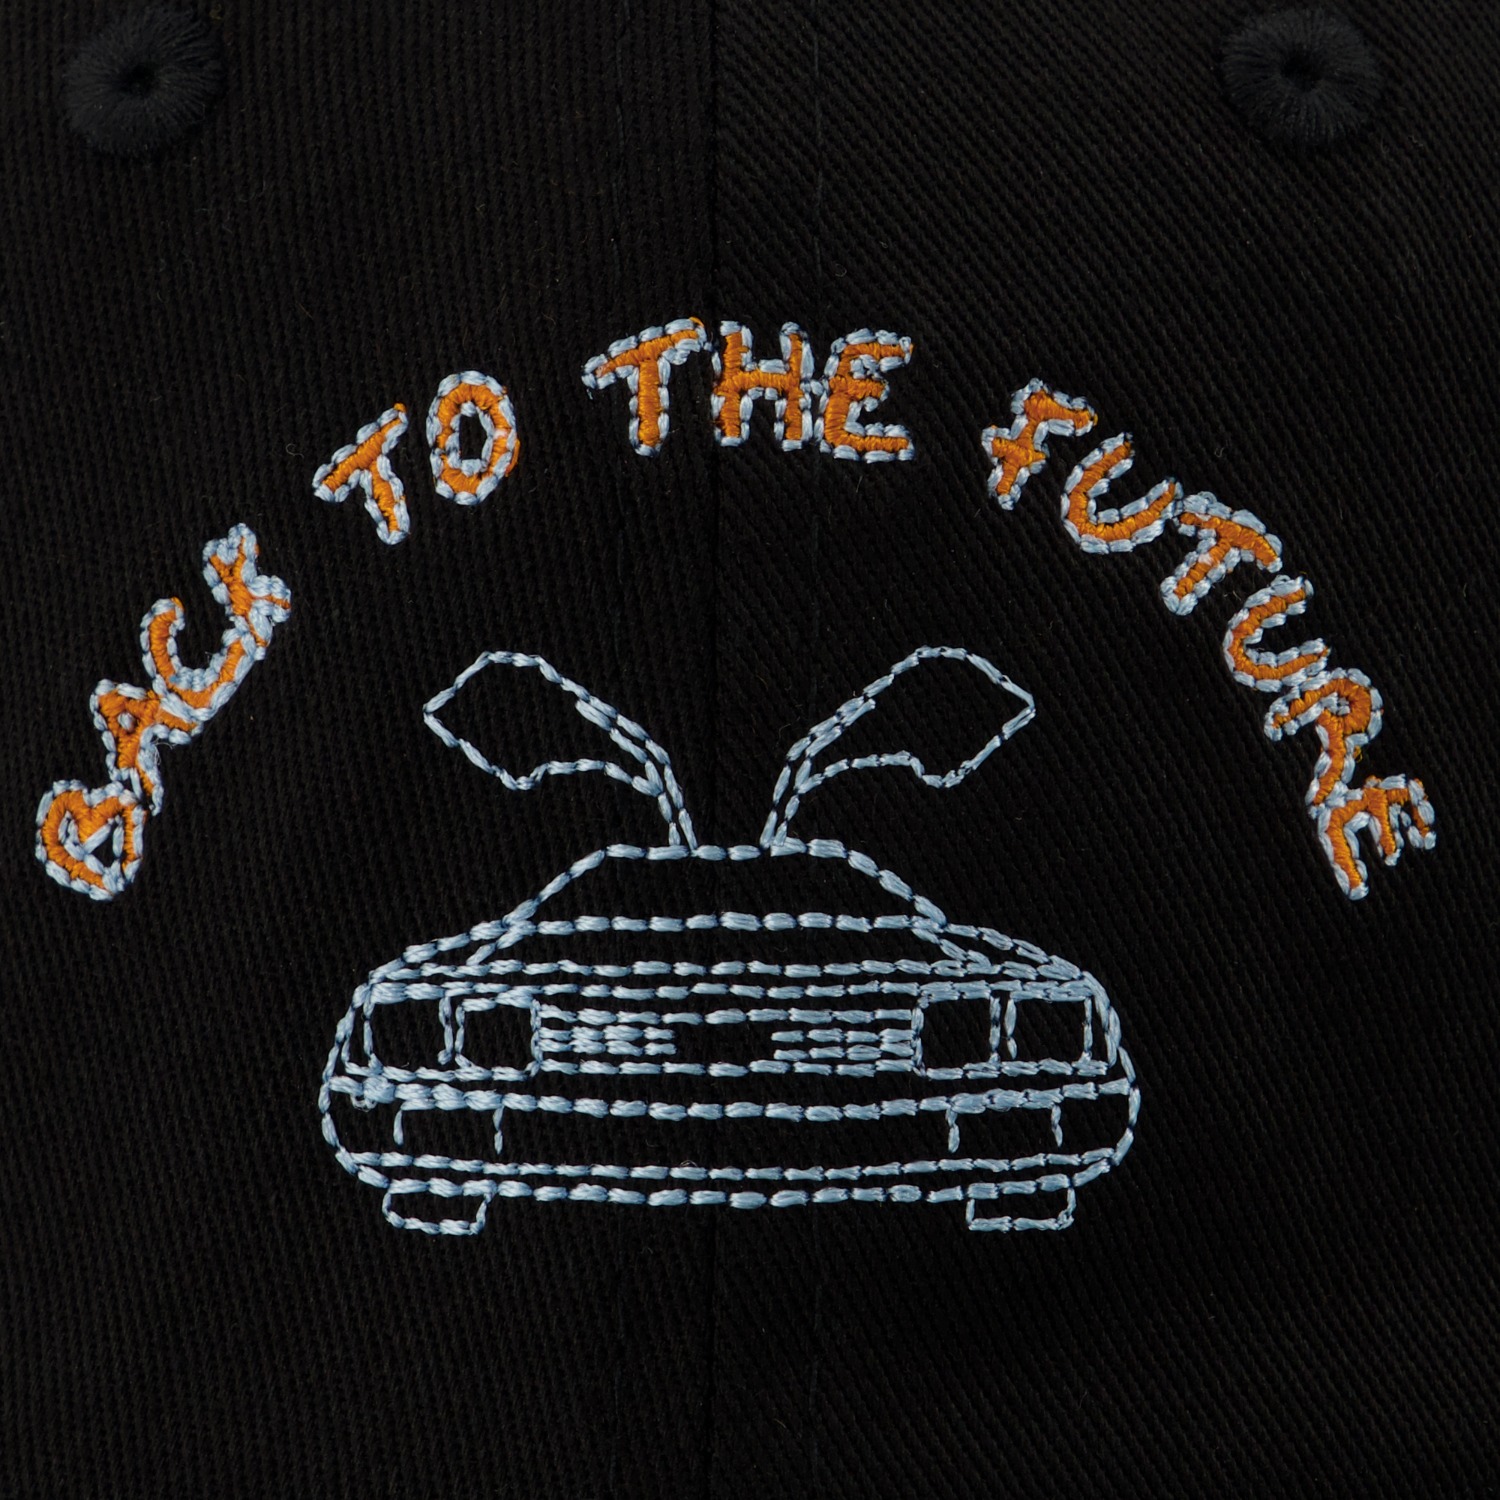 BACK TO THE FUTURE BEAUMONT CAP